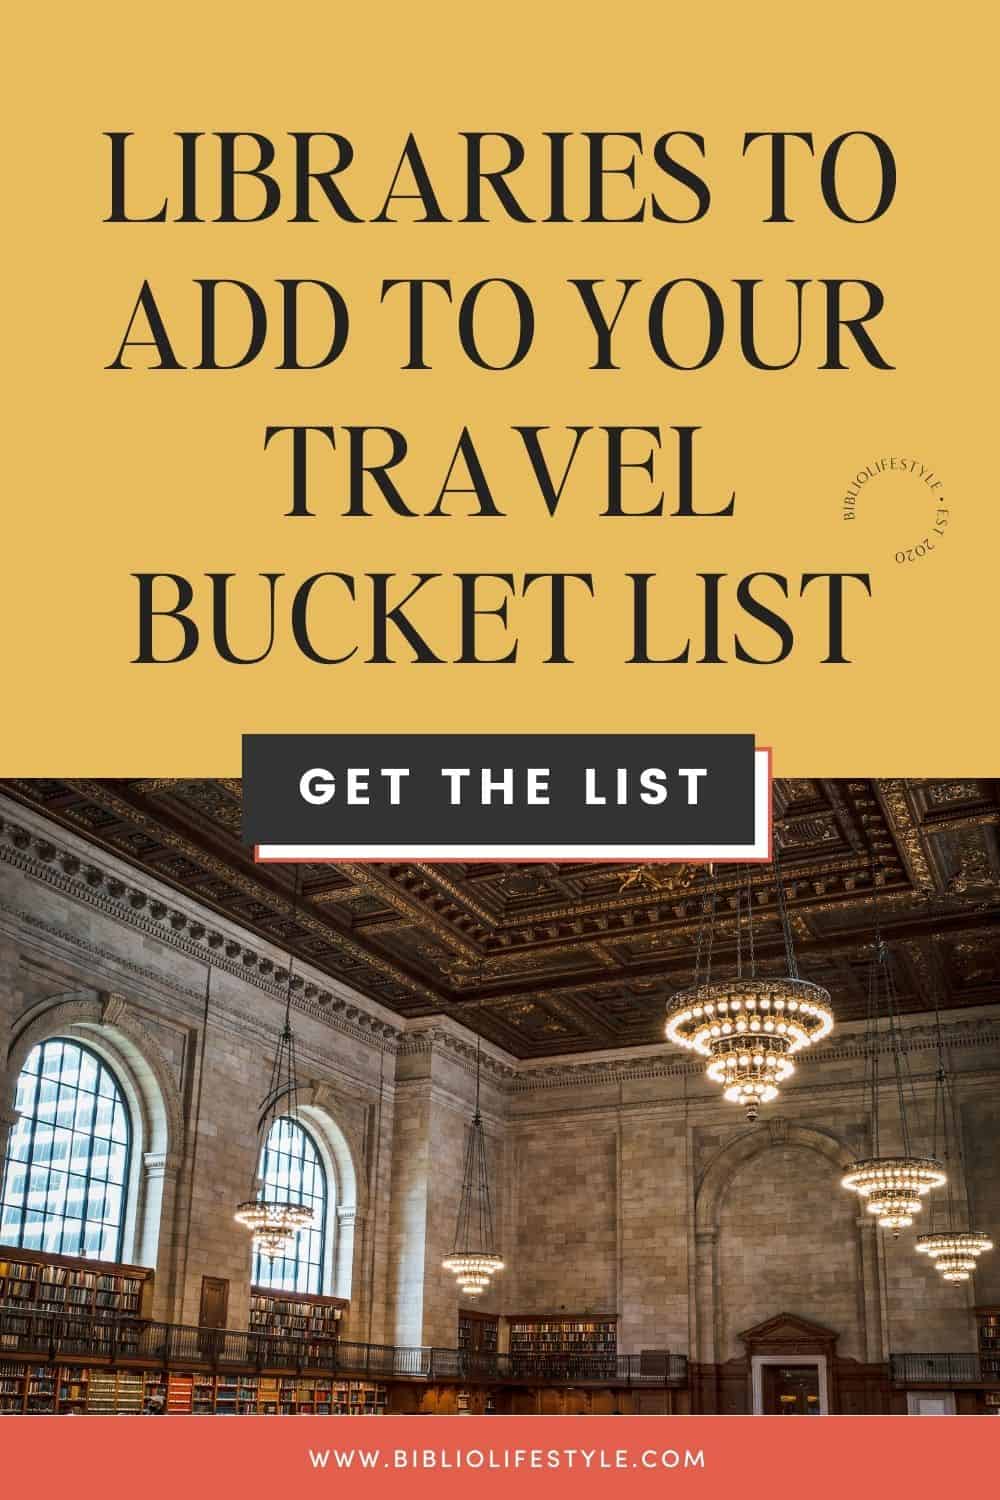 Libraries Worth Adding to Your Travel Bucket List